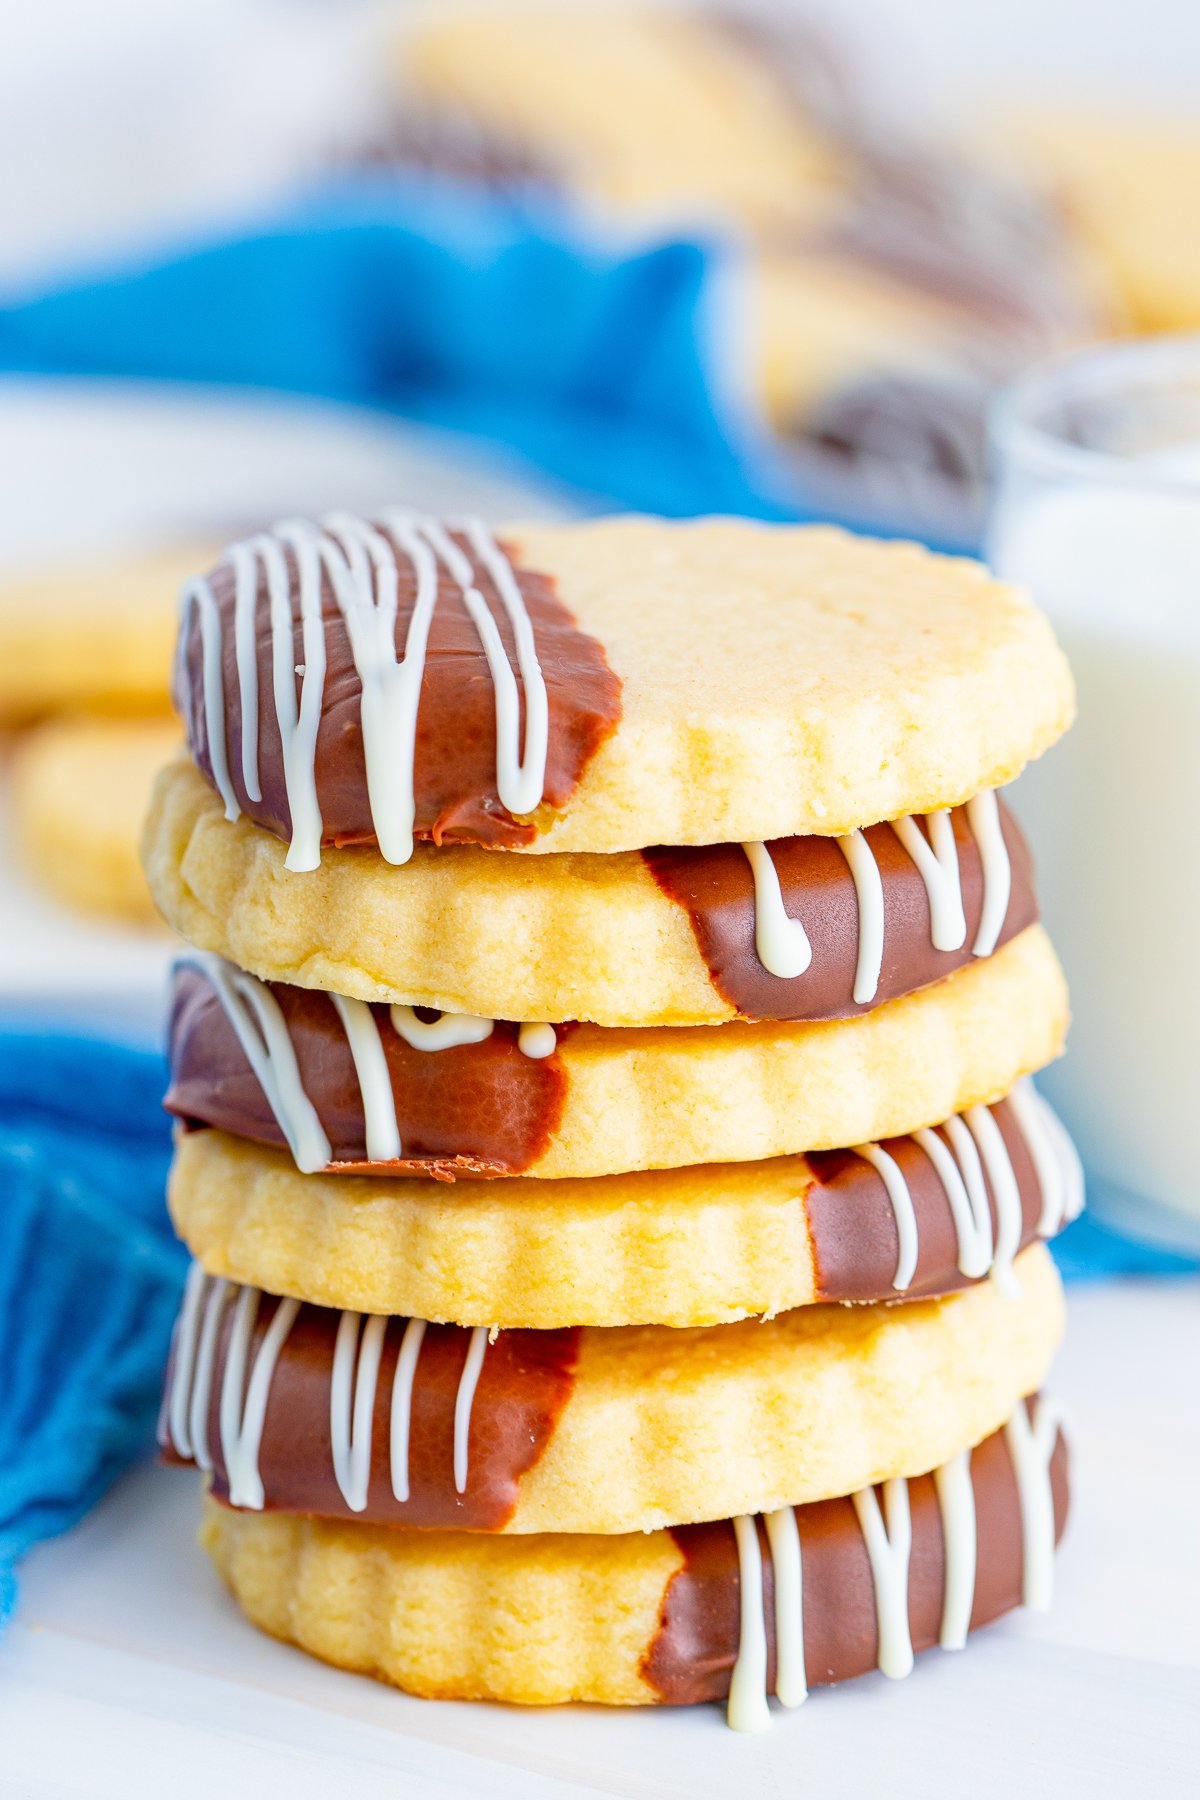 Stacked Chocolate Dipped Shortbread Cookies.